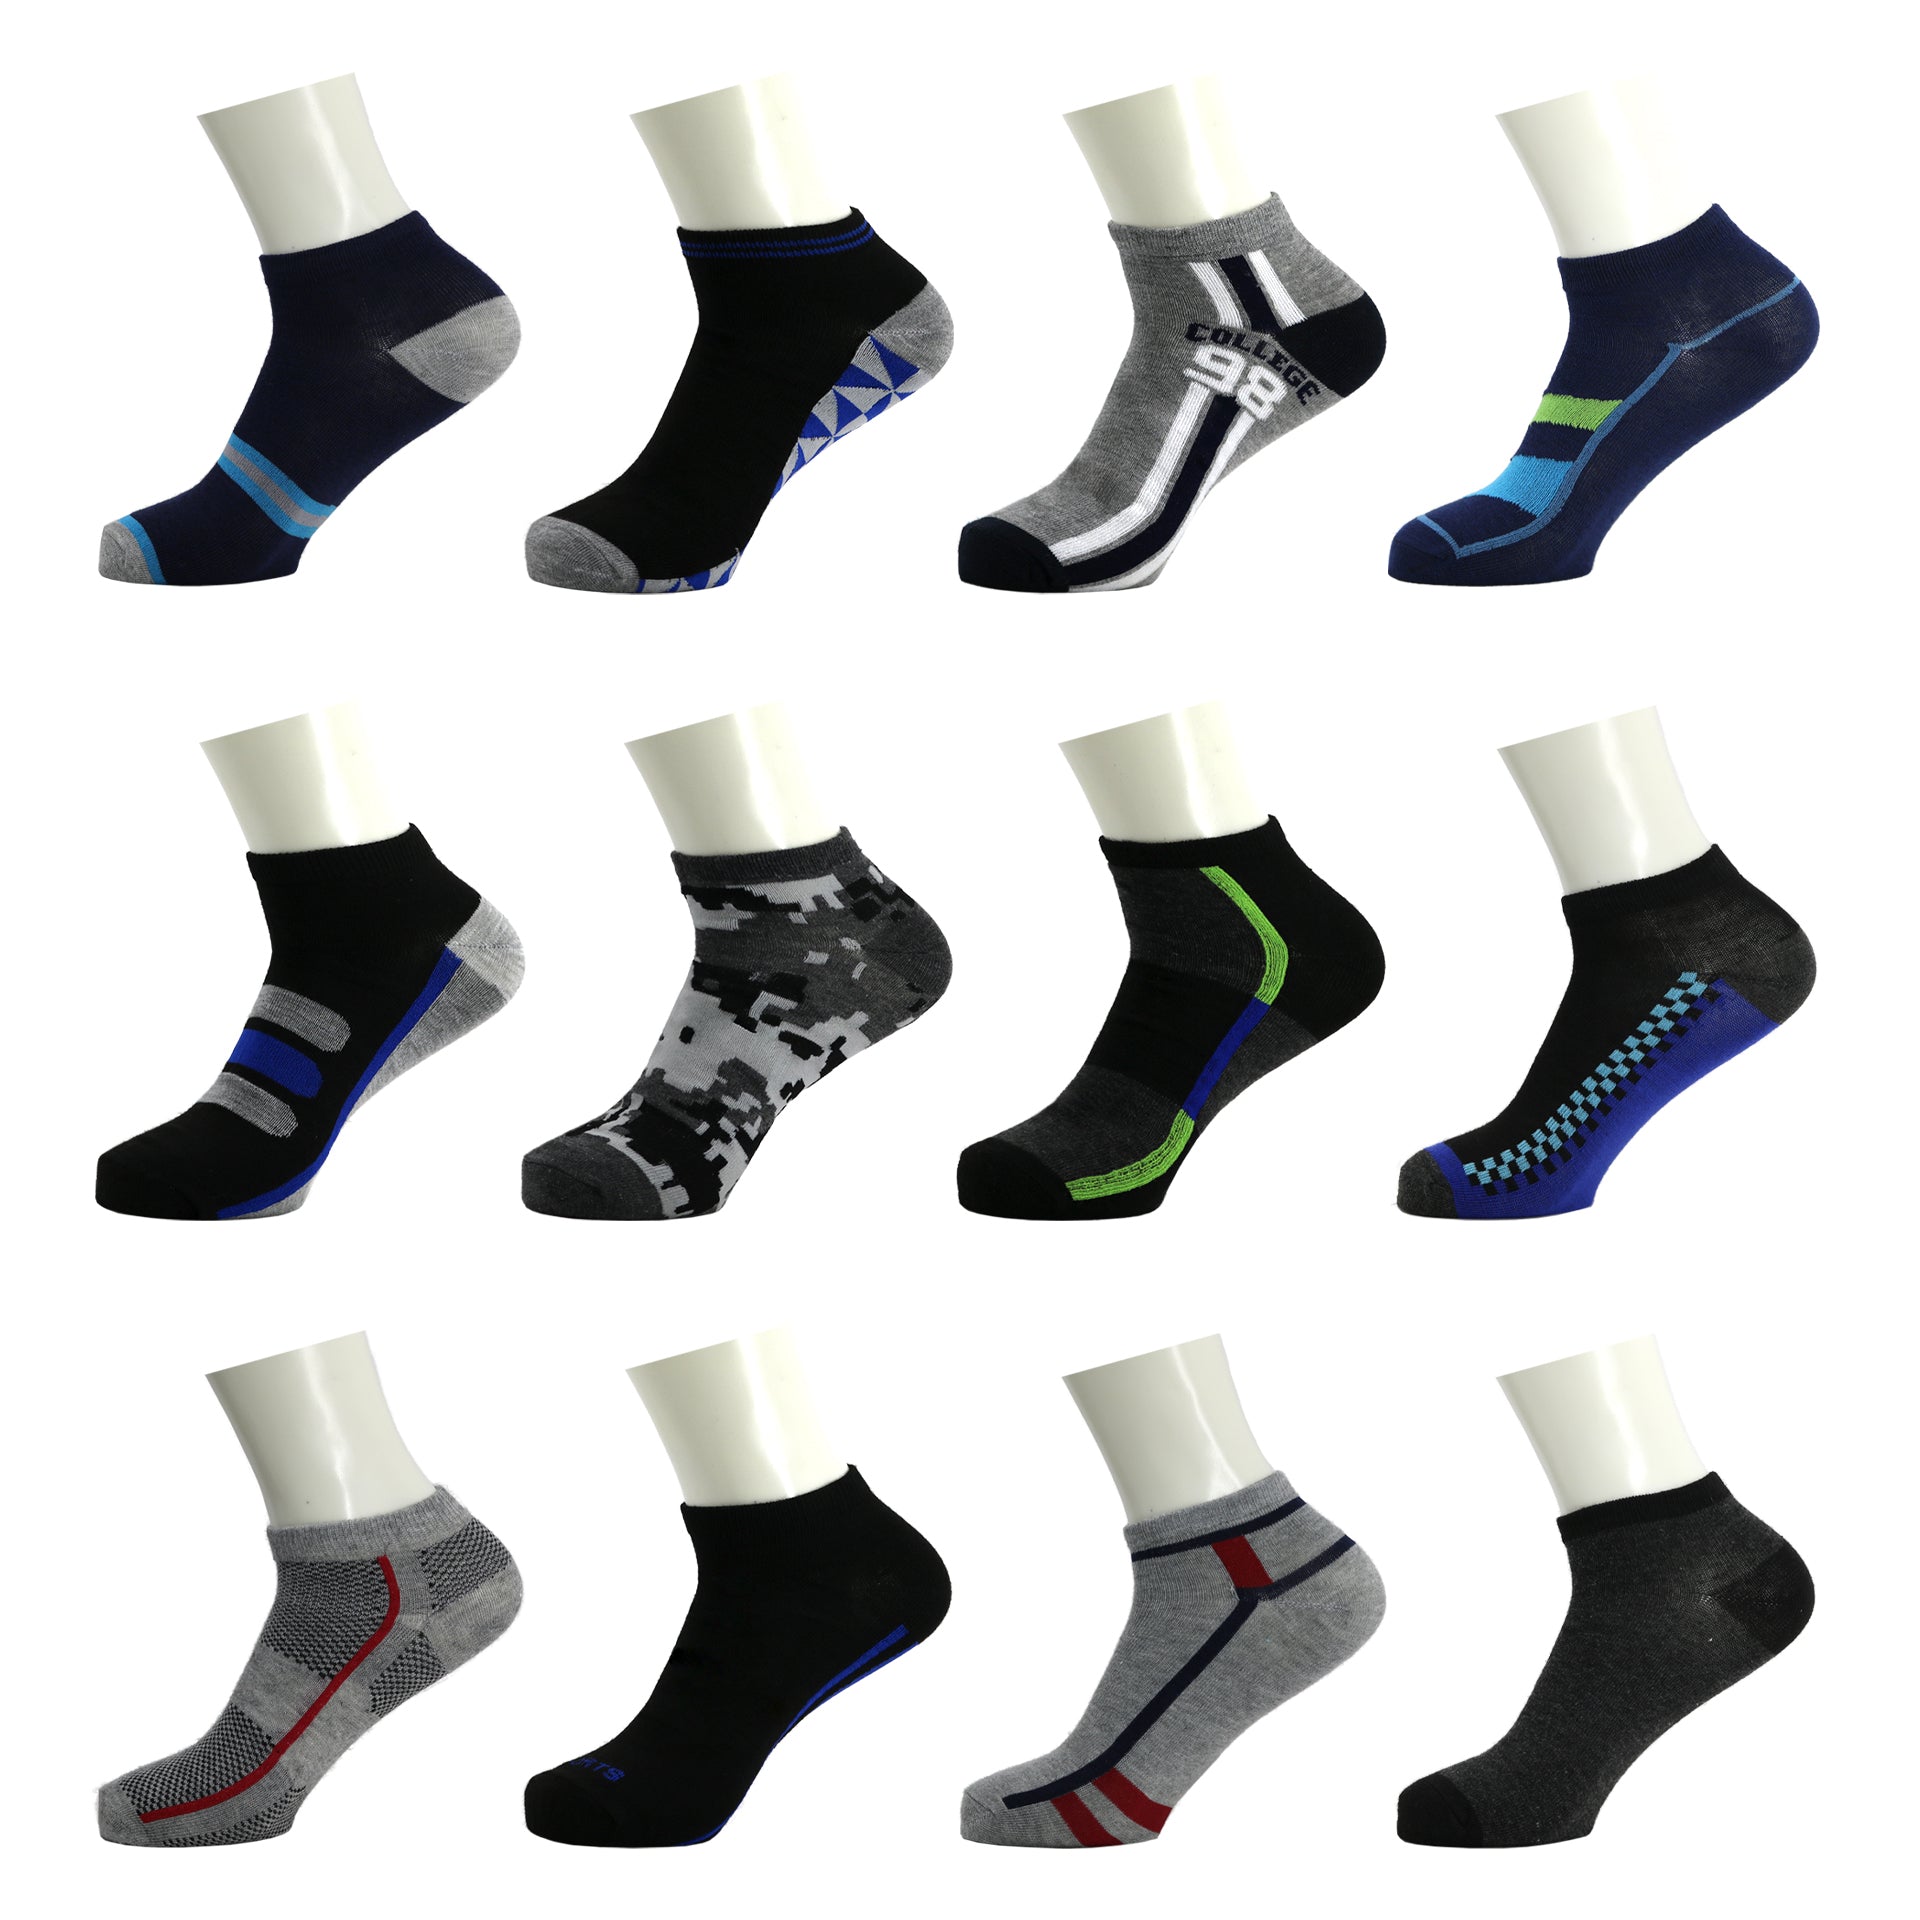 144 Pairs - Wholesale Ankle Bulk Socks - Fits Sizes 9-11 - Assorted Colors/Patterns